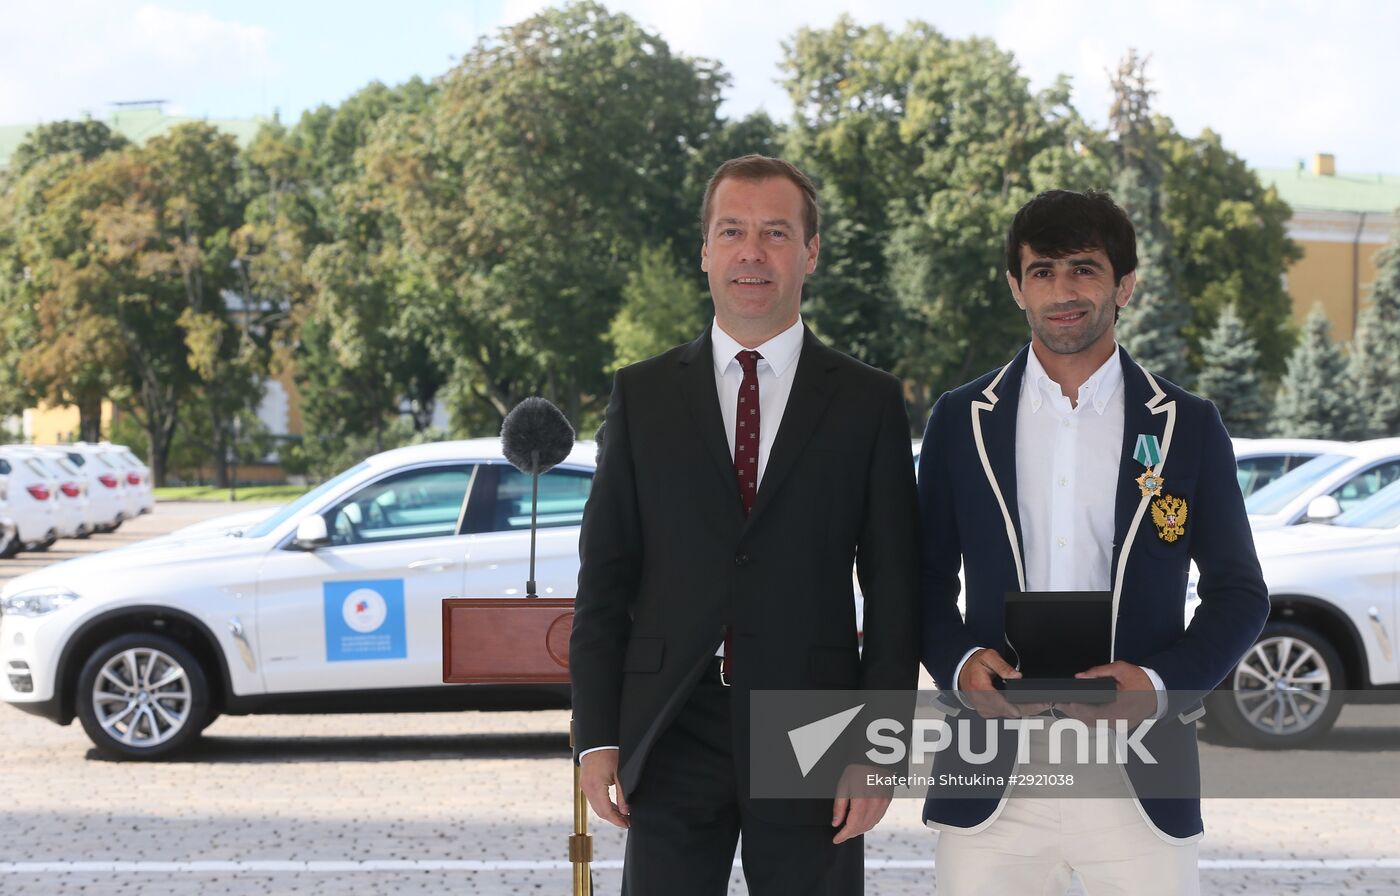 Prime Minister Medvedev hands out cars to Rio Olympics medalists